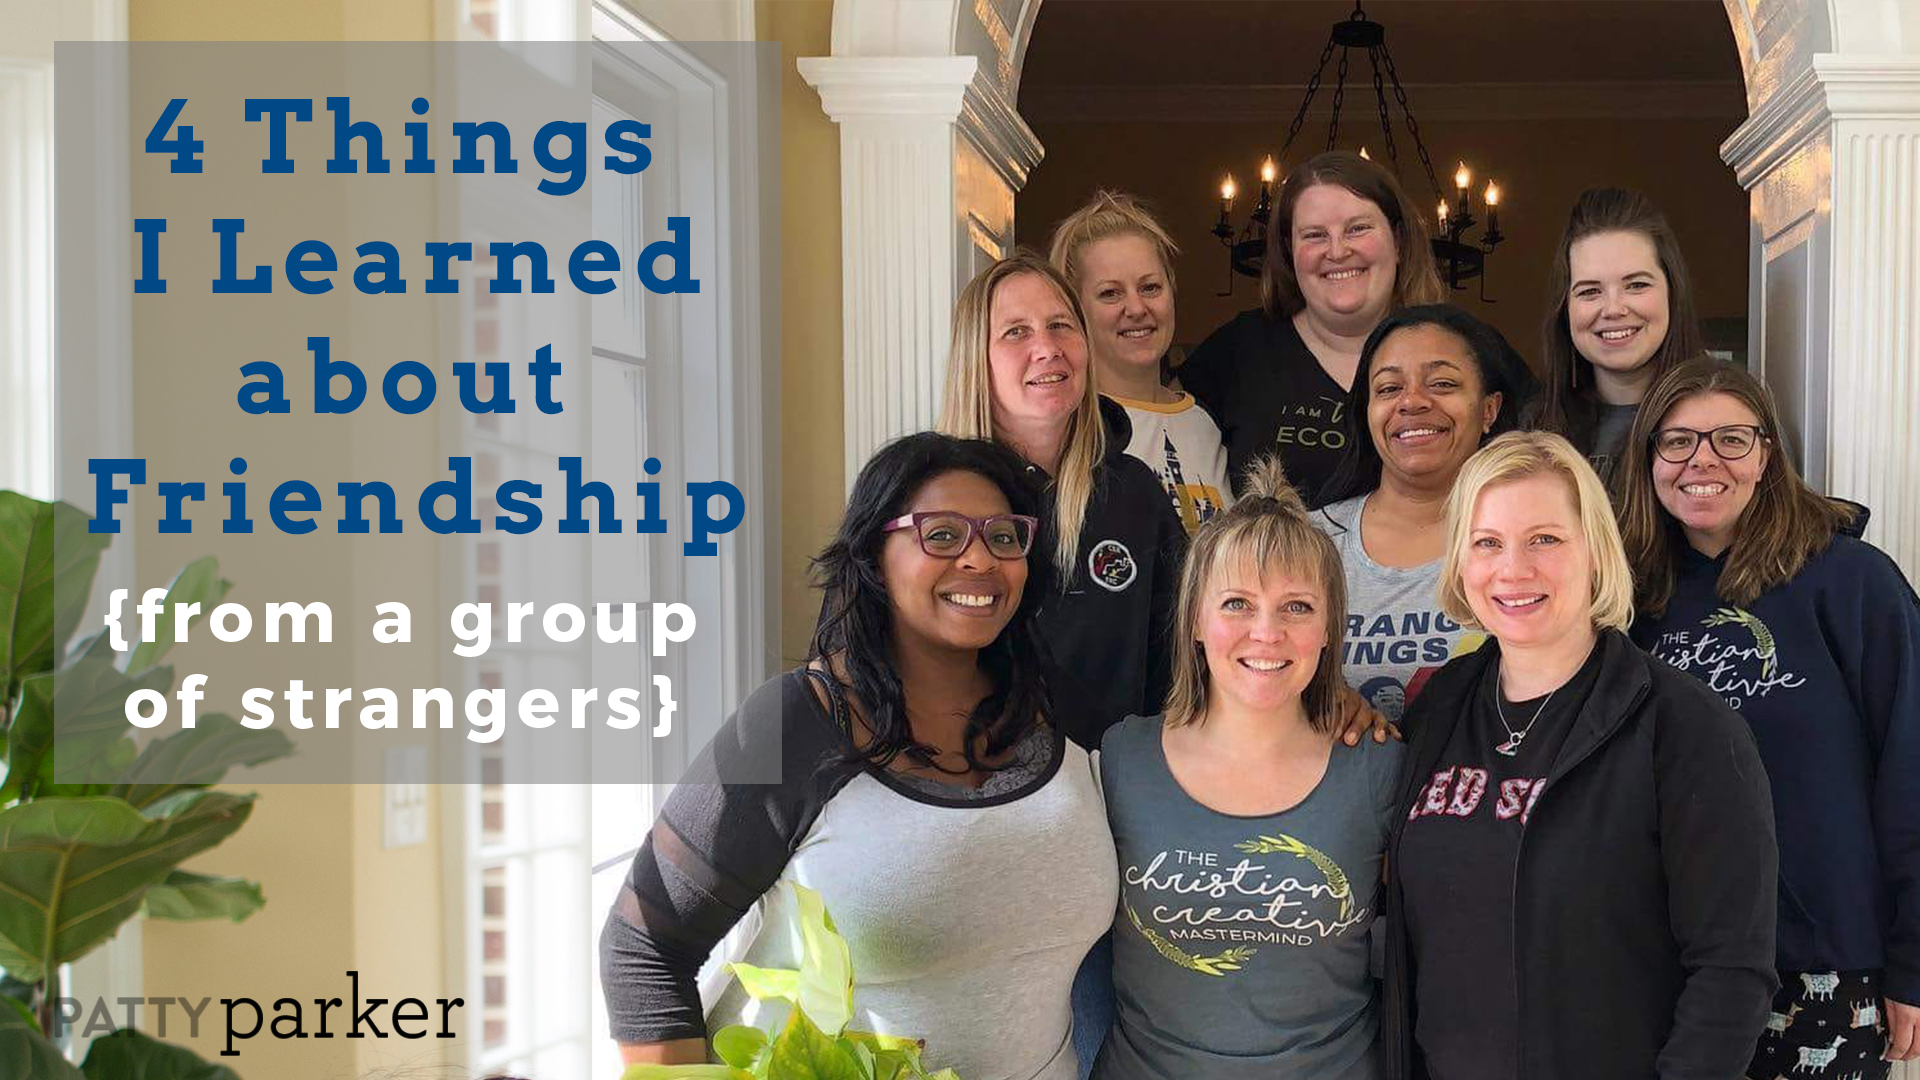 Friendship is tricky. Finding the right friends may take traveling across the country. But then again you may find them in your very own neighborhood. Here are 4 things I learned about friendship from a group of strangers. 